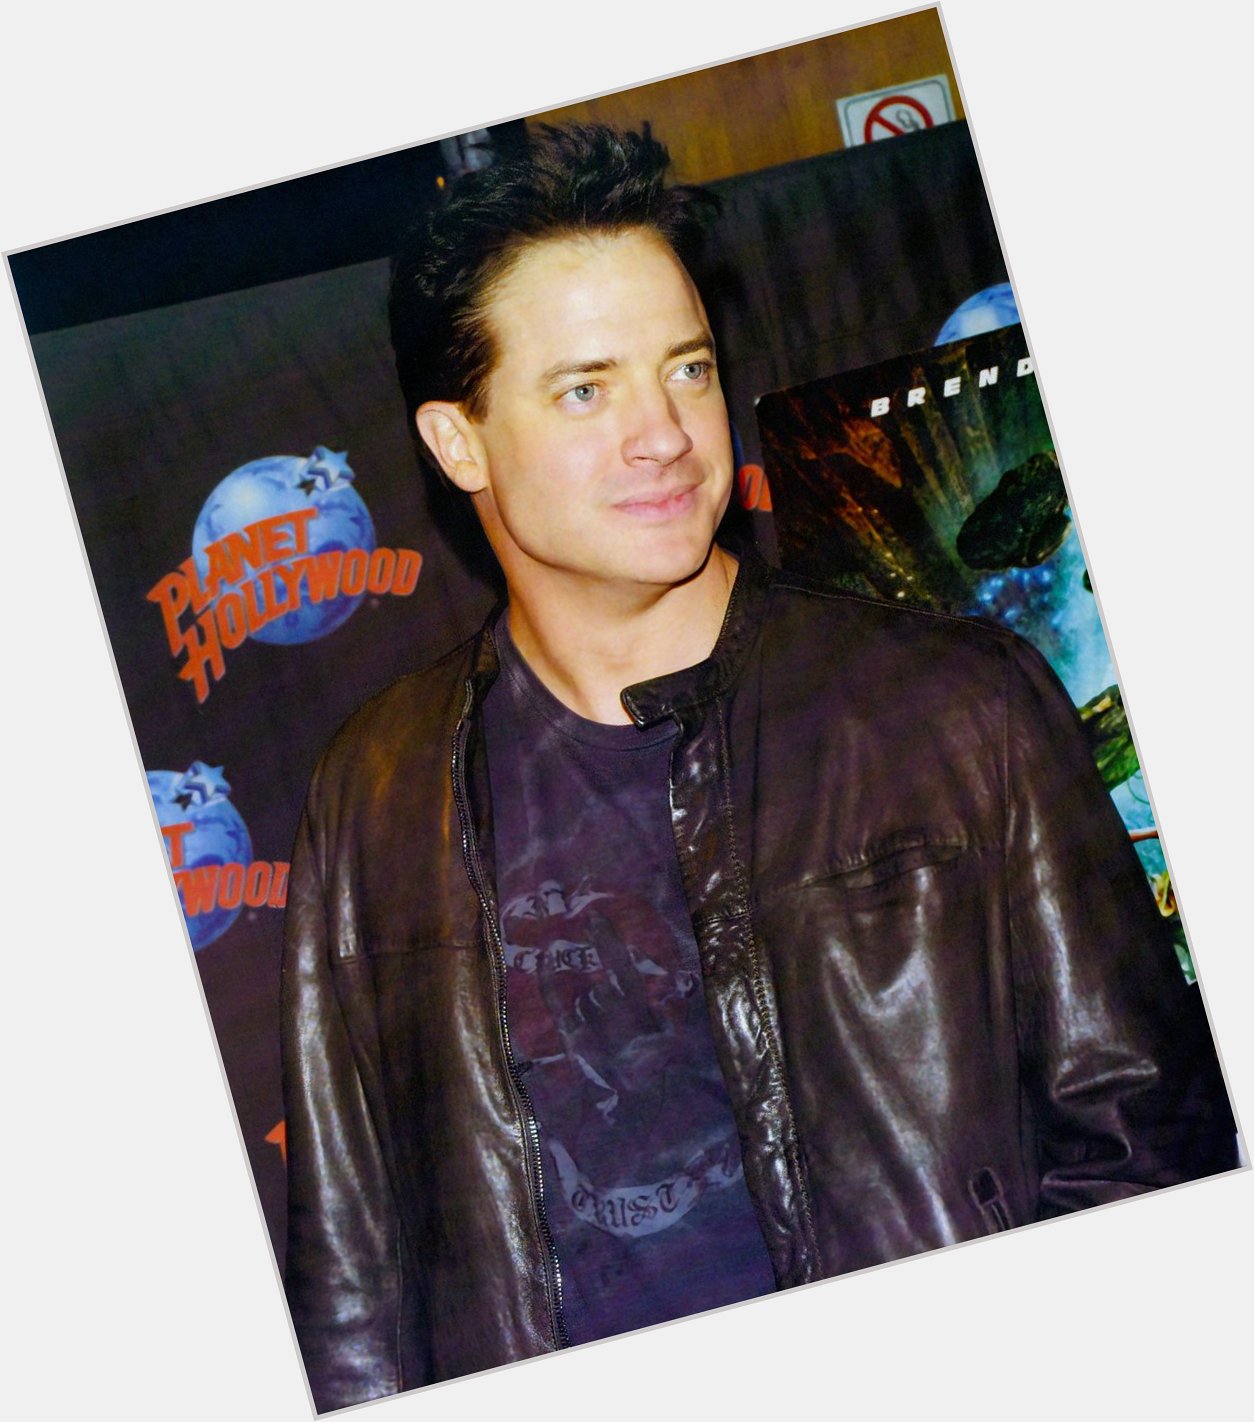 We interrupt you week to say Happy Birthday to the one and only Brendan Fraser! 